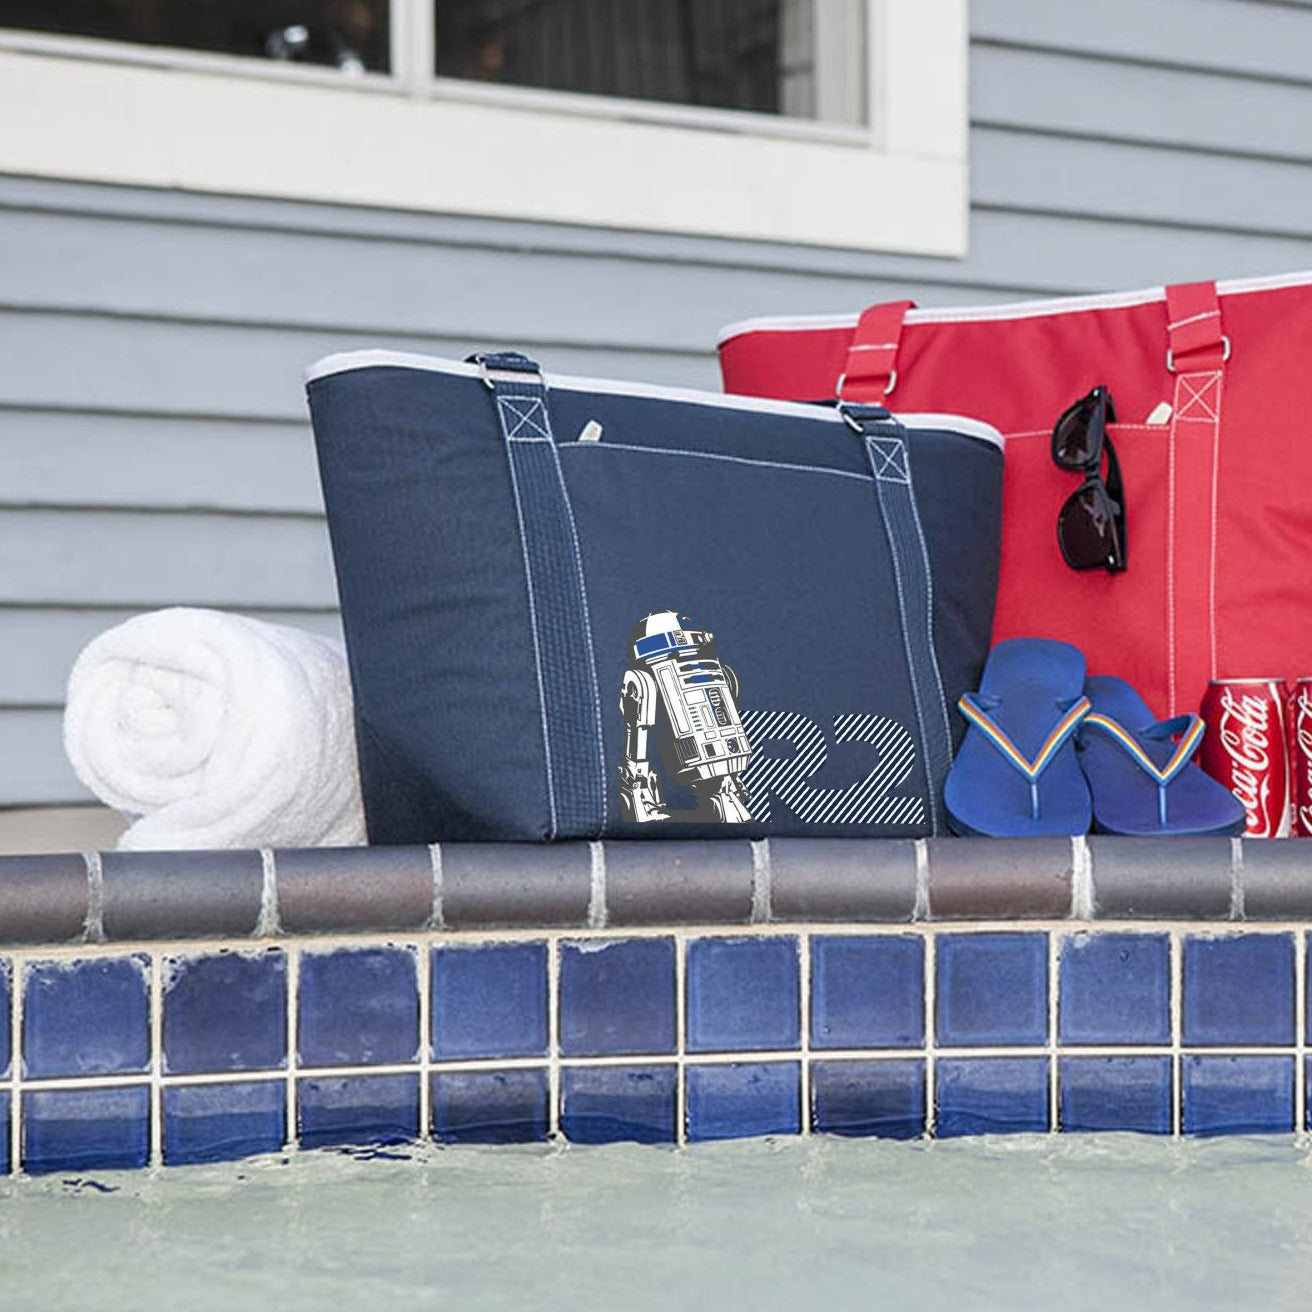 R2-D2 (Star Wars) Insulated Cooler Tote Bag